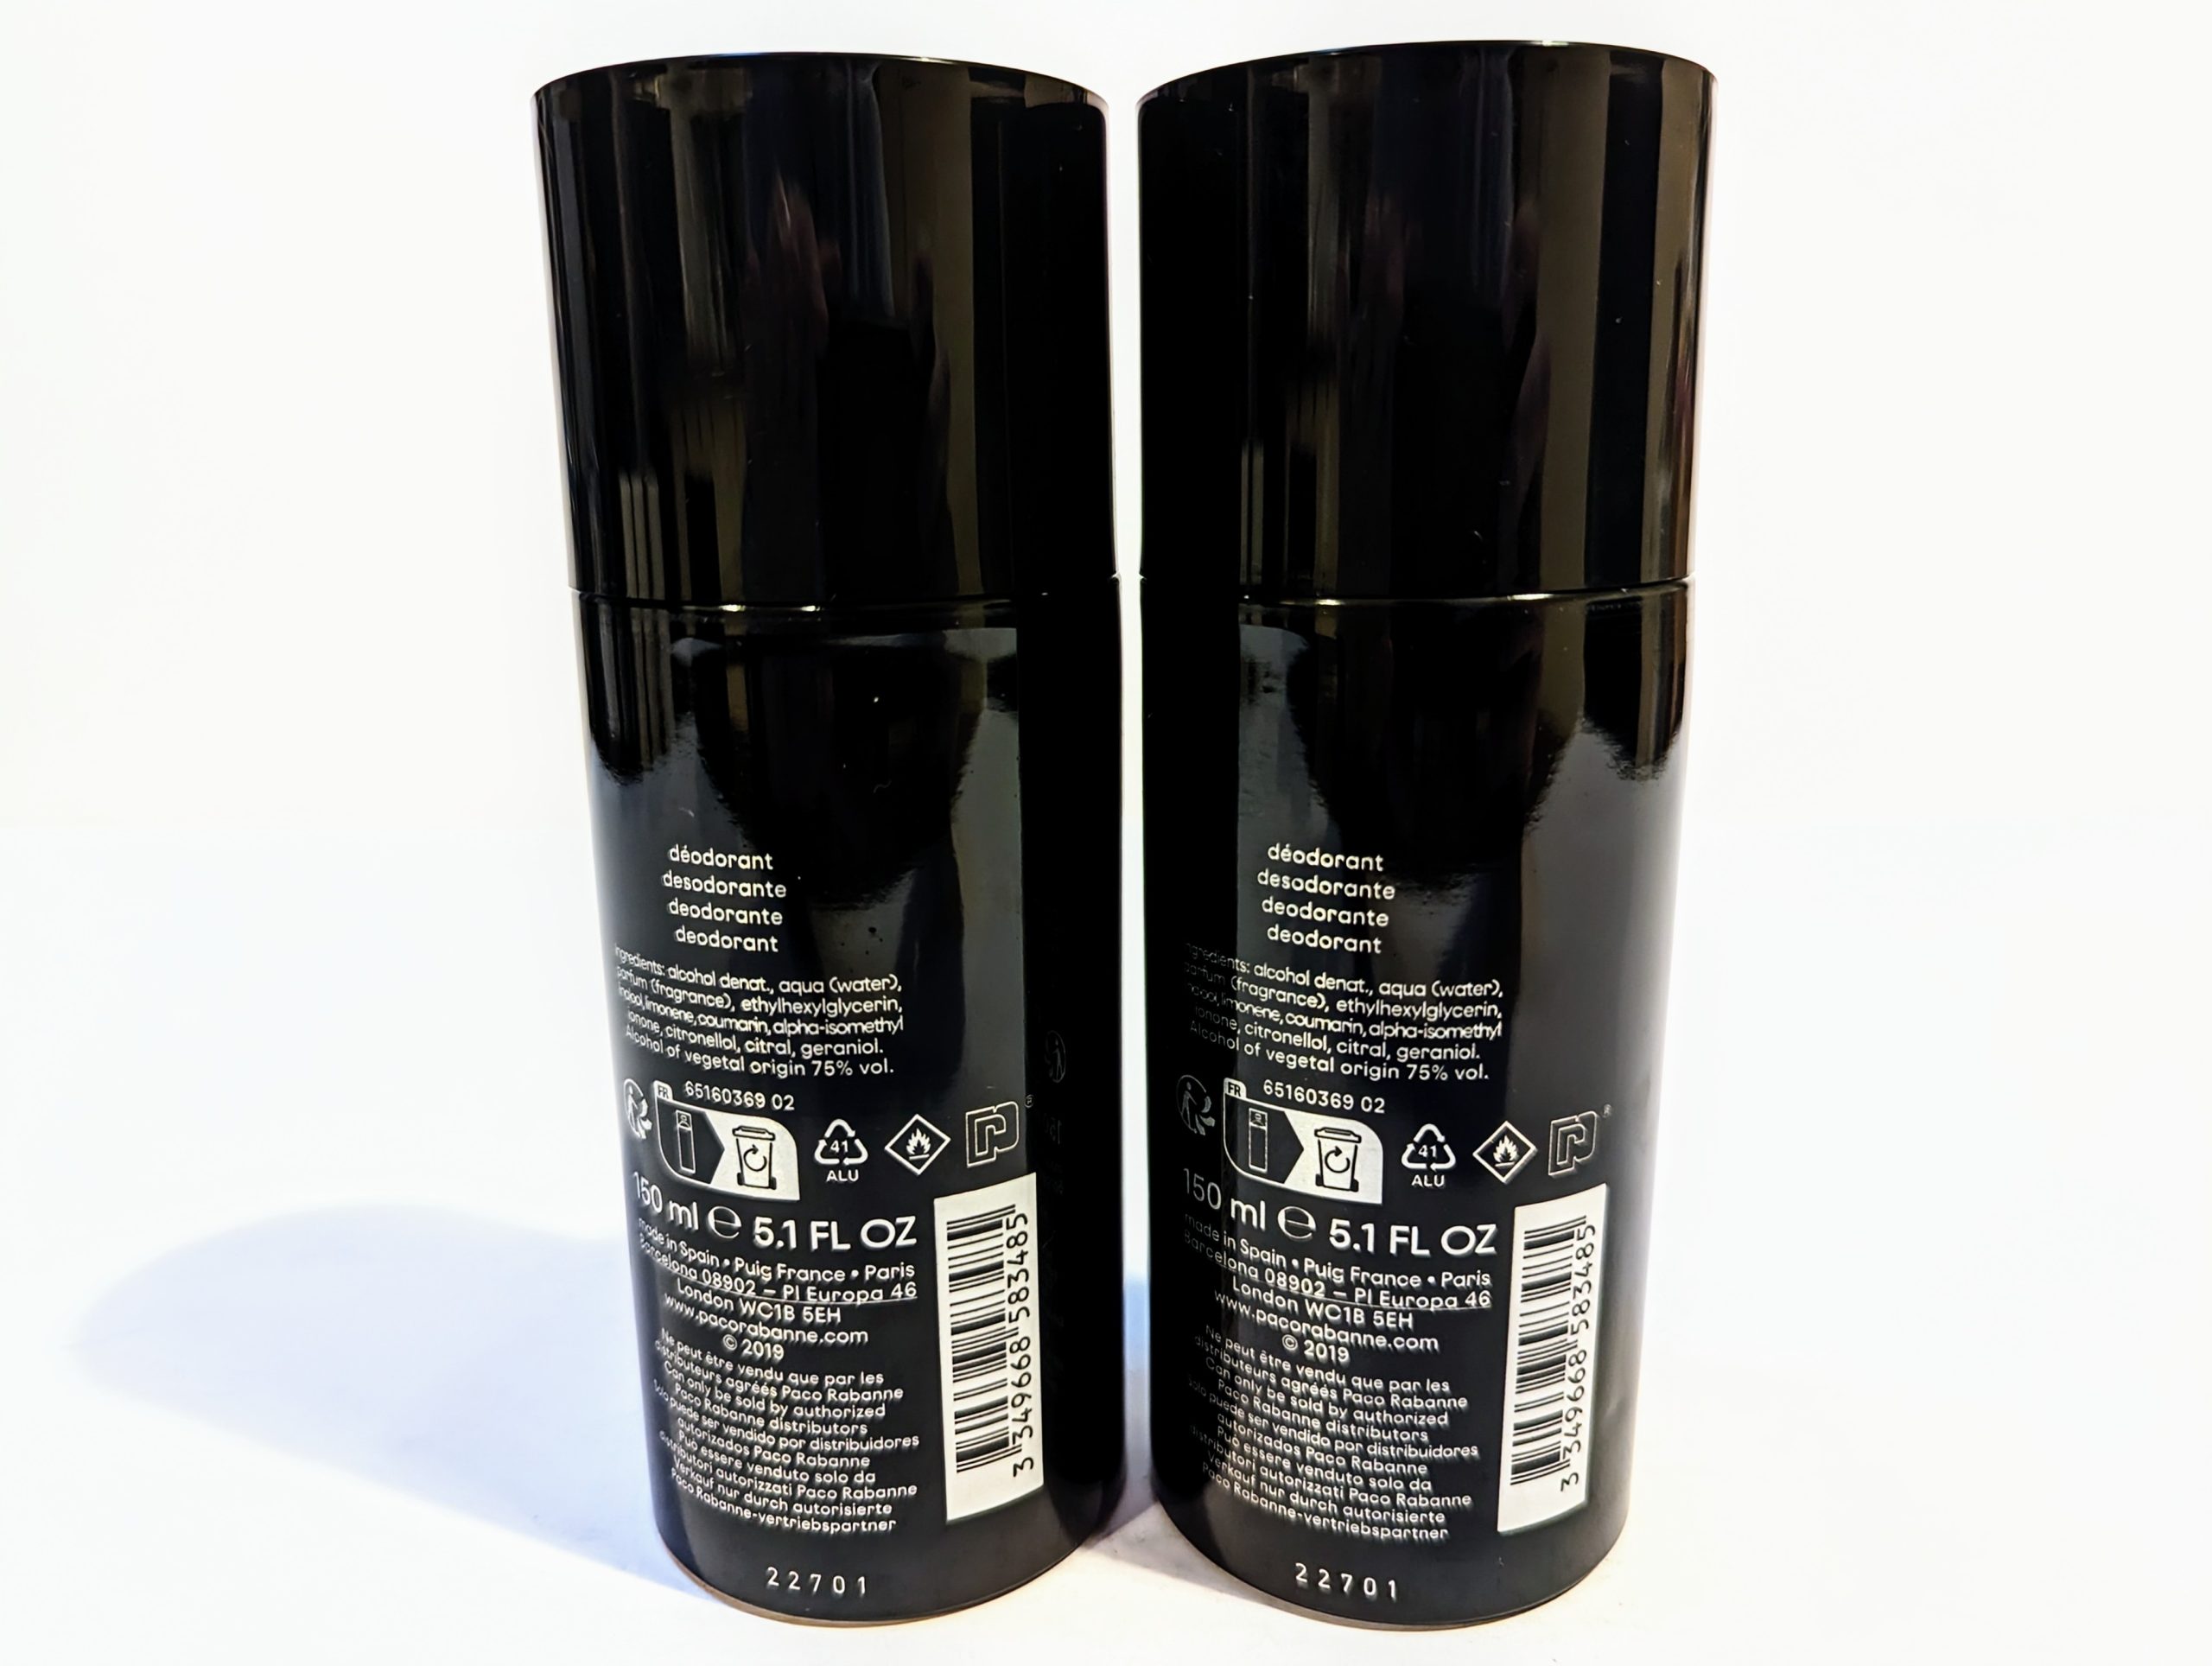 Two black deodorant spray cans facing backwards, displaying product labels and ingredient lists. Each can contains 150 ml (5.1 fl oz) of deodorant.